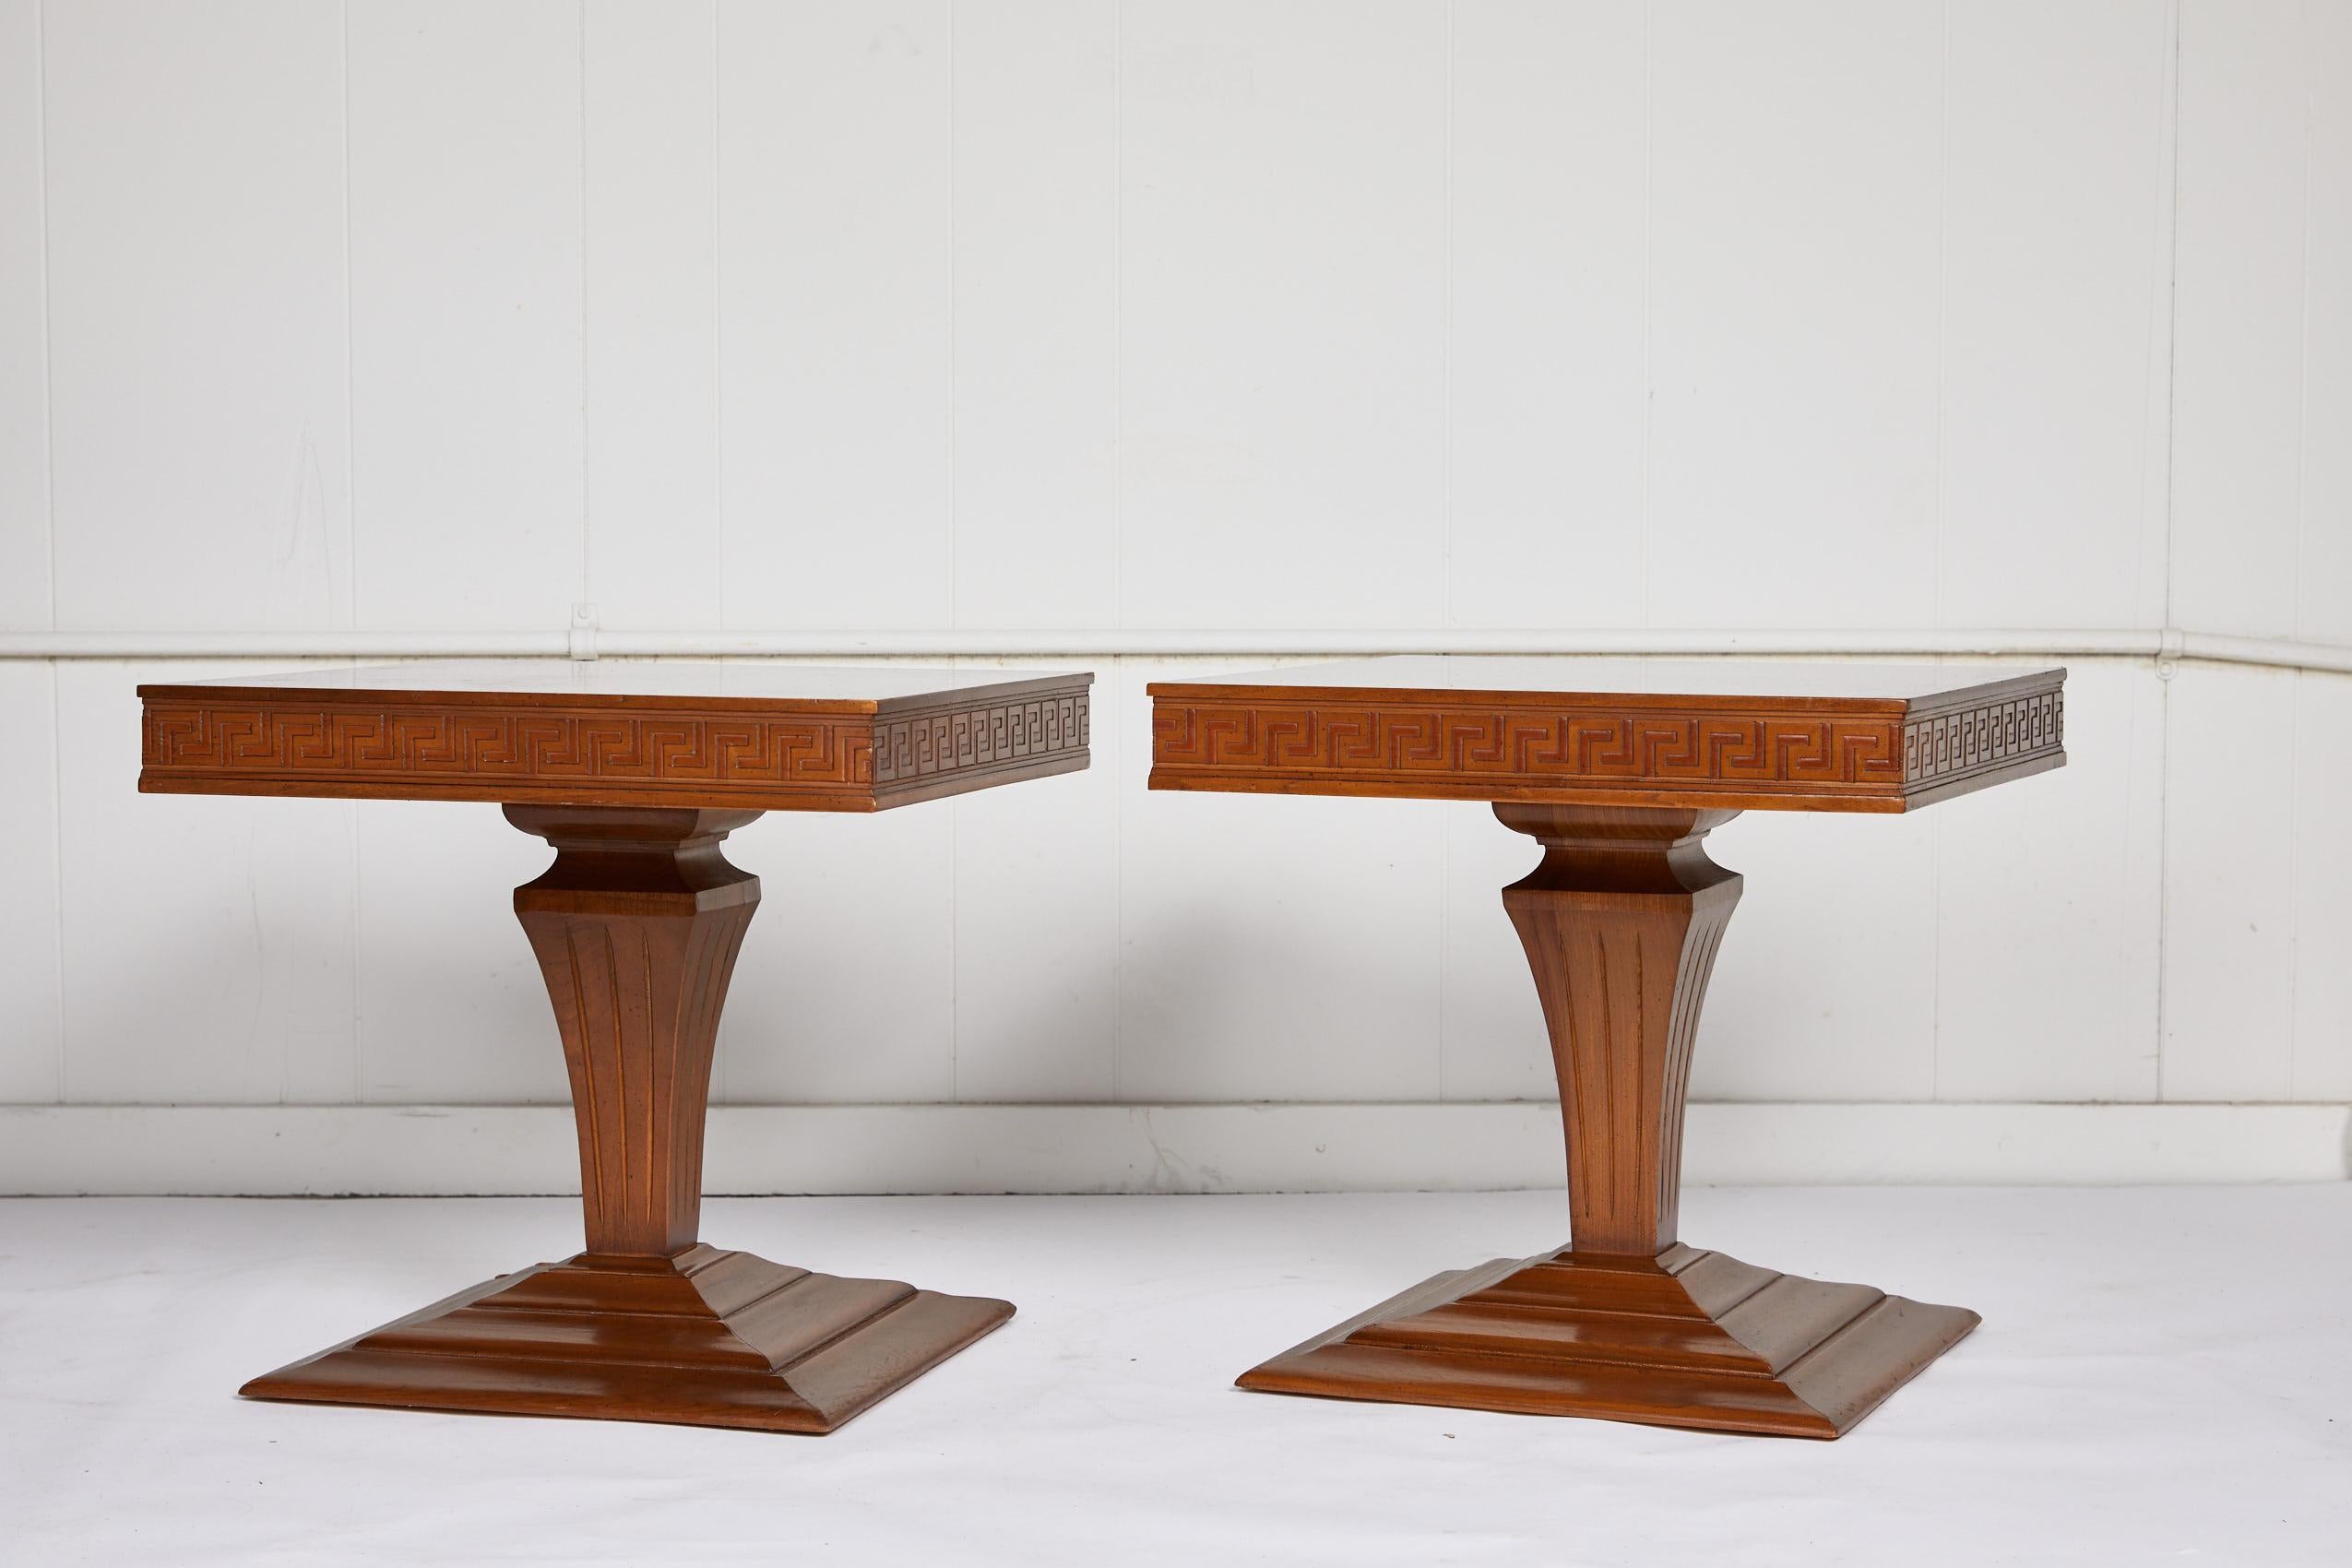 Midcentury pair of low square side or end tables with a checkered veneer top and Greek key apron over a carved urn shaped pedestal and tiered platform base. The vintage tables are symmetrical and finished on all sides.